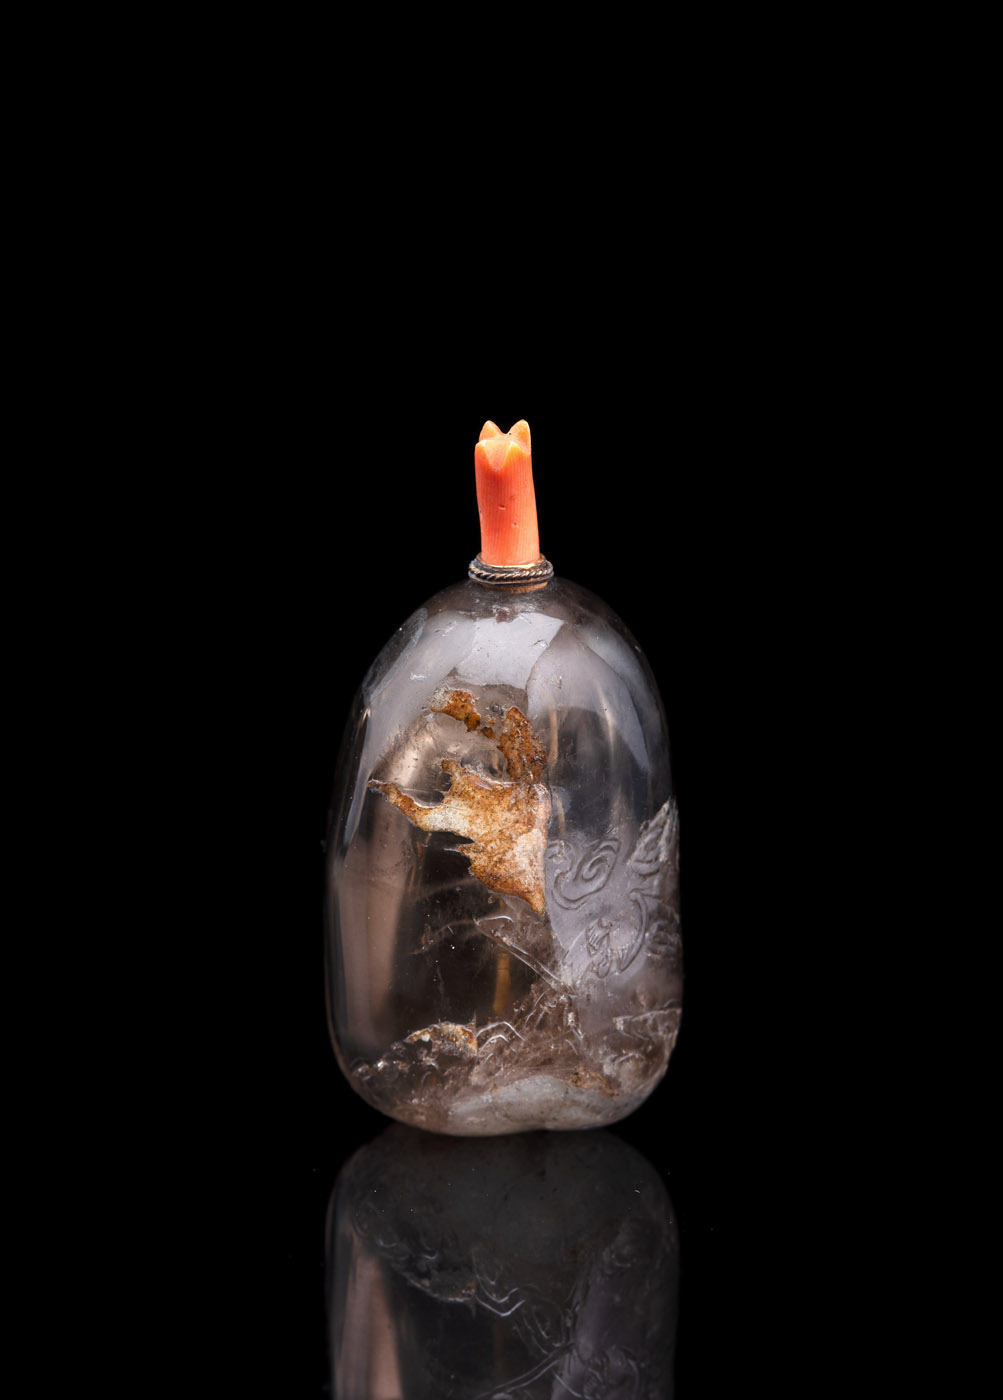 <b>A SMOKE-COLORED PEBBLE-SHAPED CRYSTAL SNUFFBOTTLE WITH BATS AND DEER NEAR CLOUDS</b>